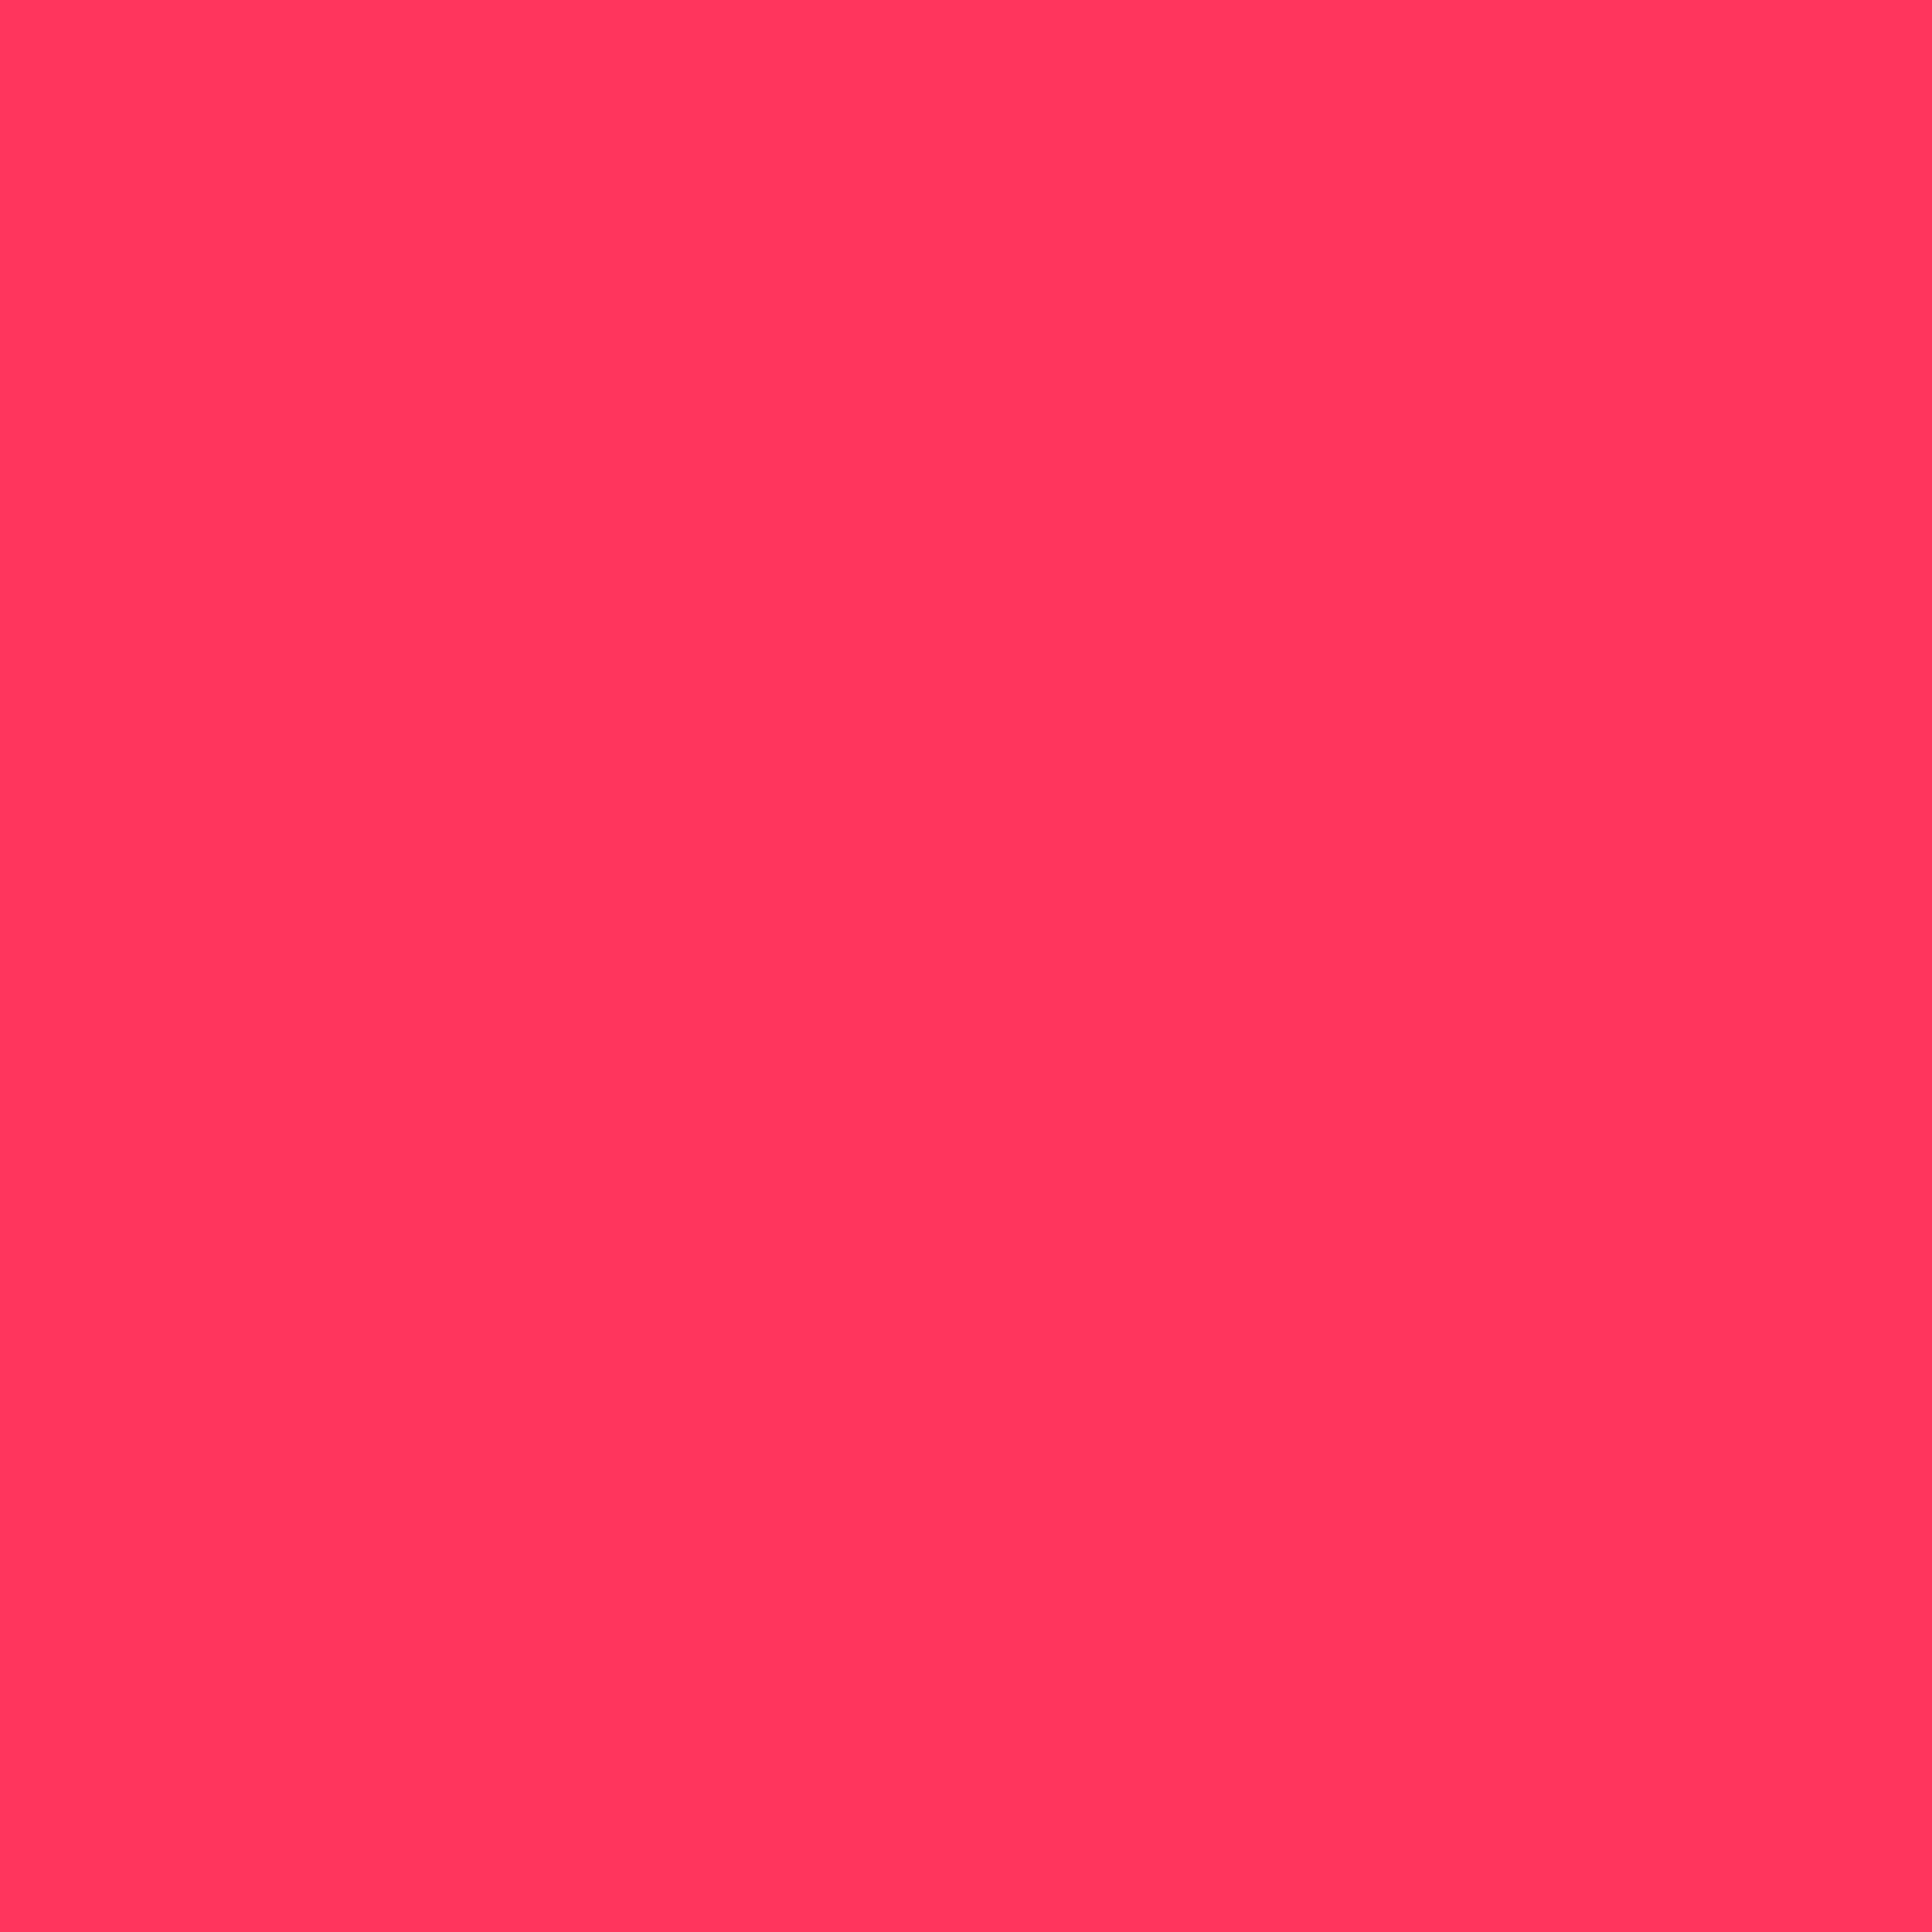 3600x3600 Radical Red Solid Color Background